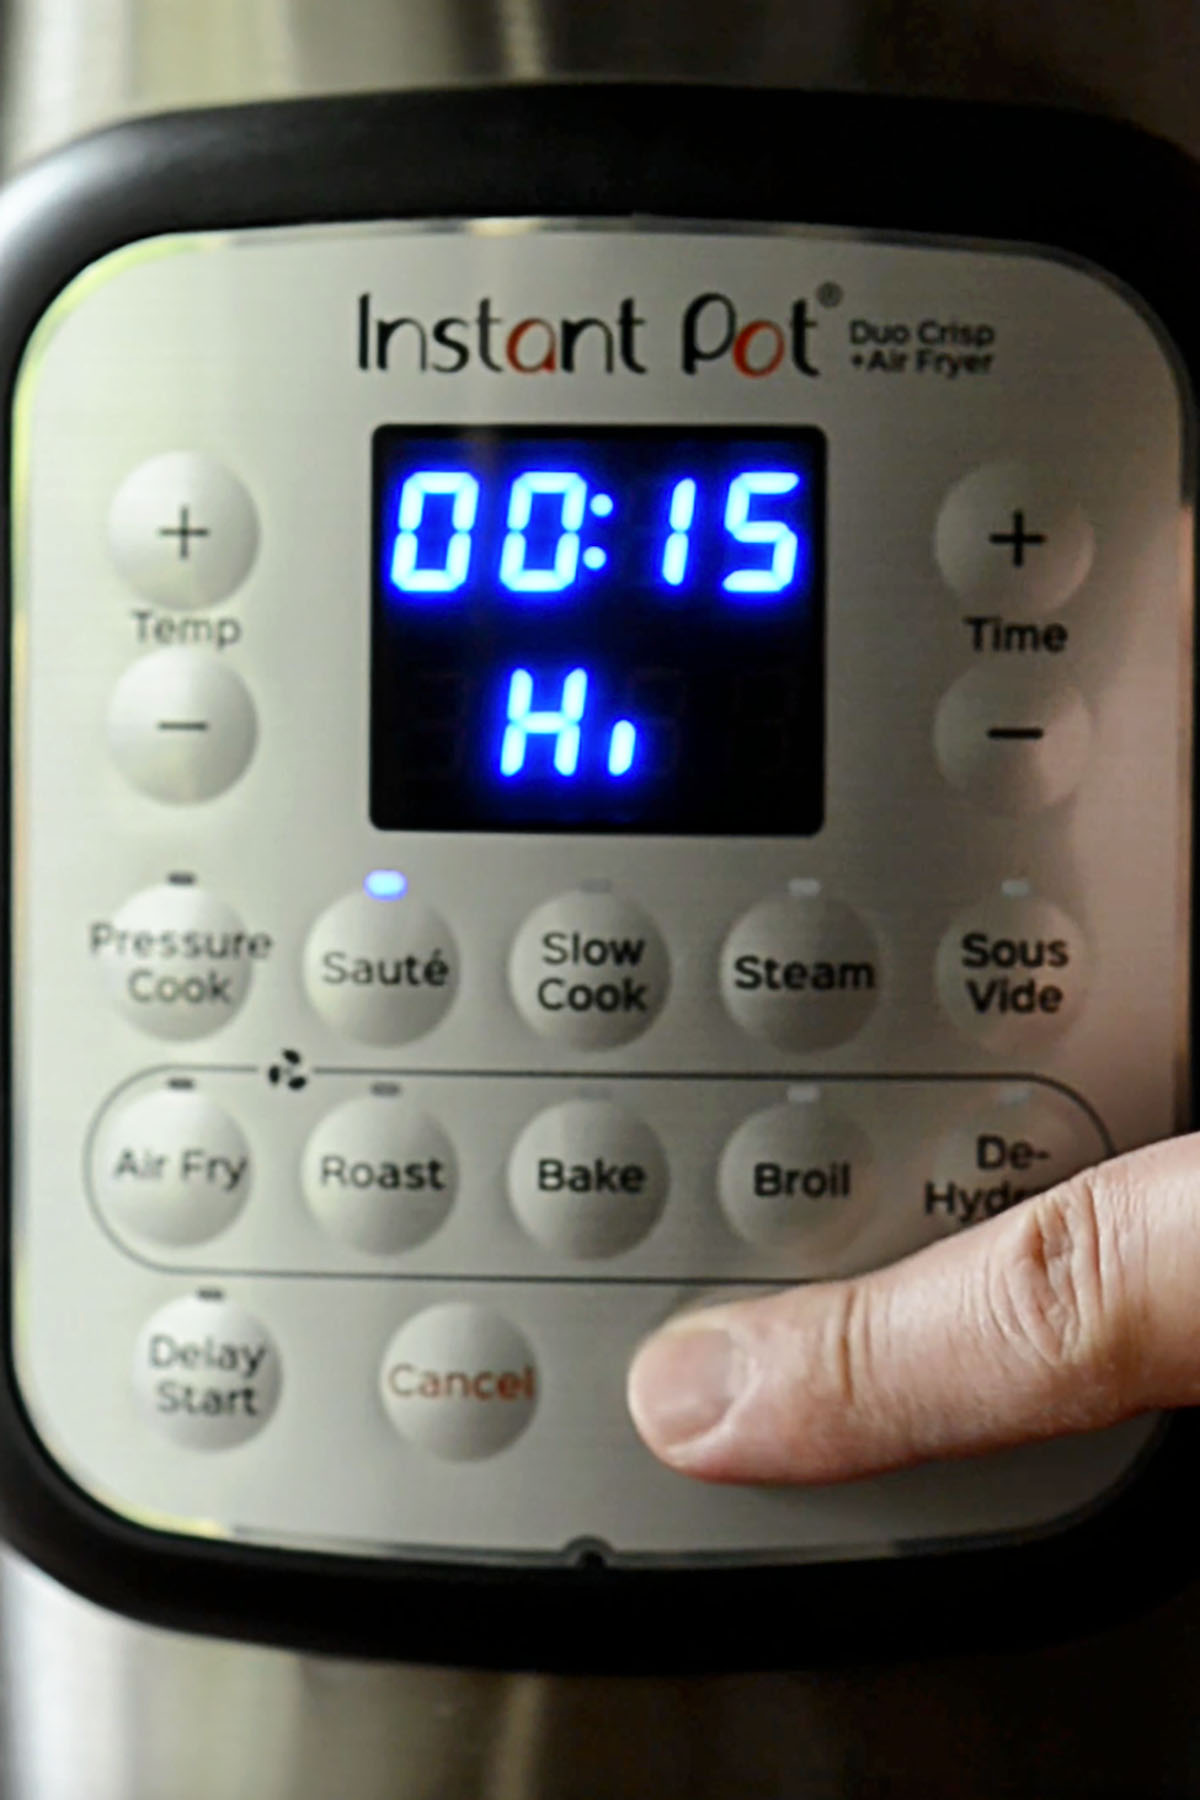 Instant Pot being set to sauté on high for 15 minutes.